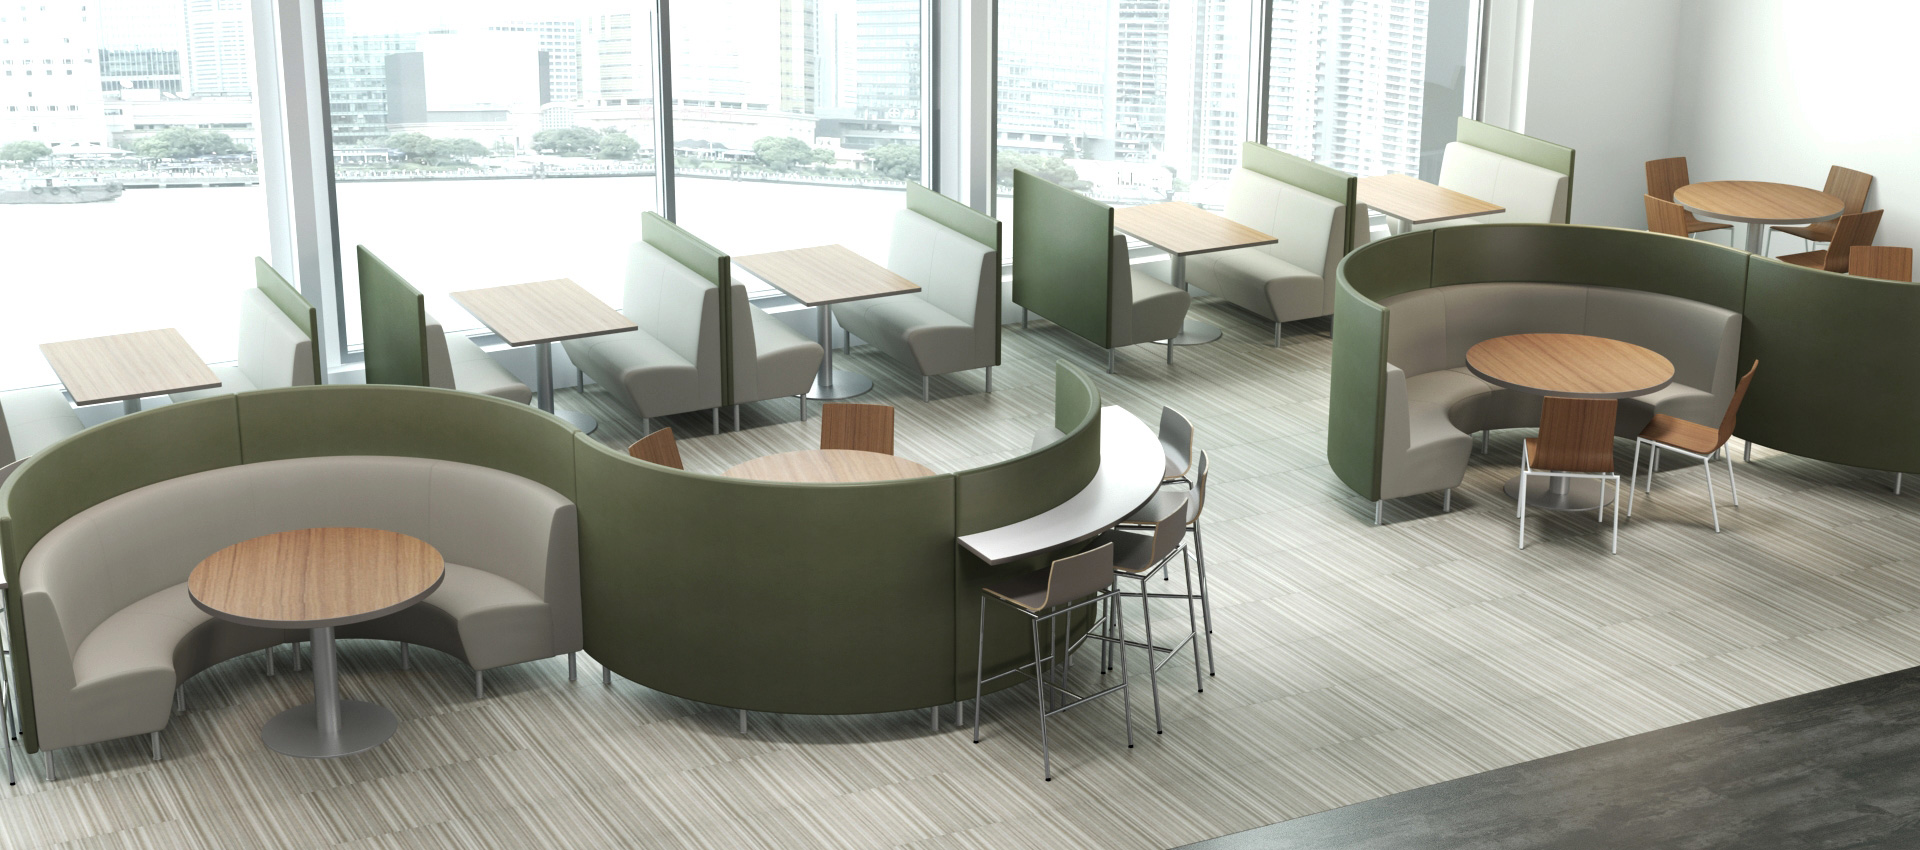 Curved banquette seating with wood privacy panels in serpentine design shown in casino